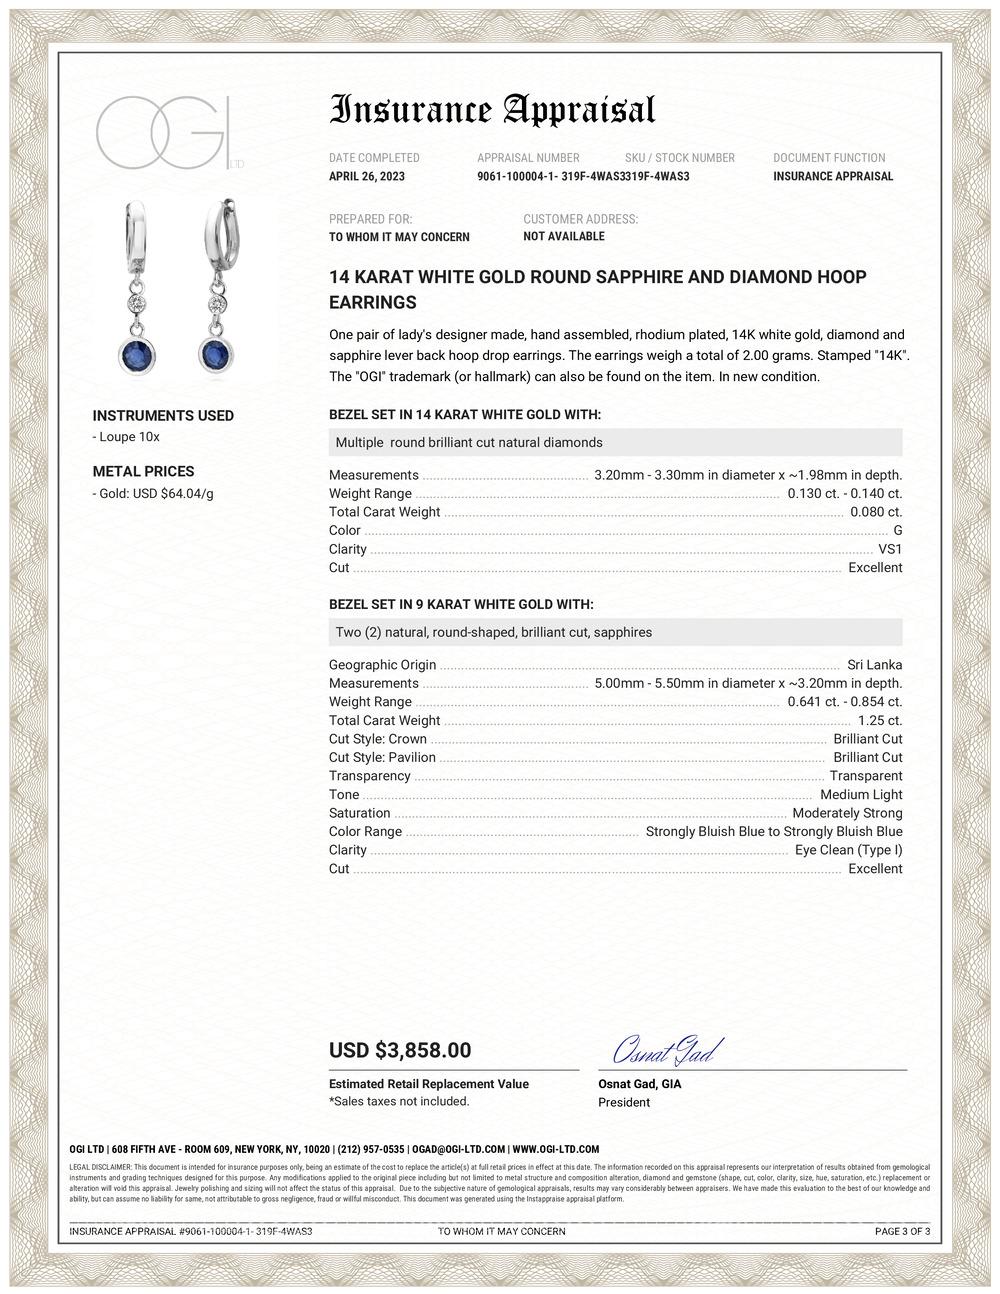 Fourteen karats white gold diamond huggie lever back earrings with round sapphire drops
Two round sapphires weighing 1.25 carat
Two round diamond weighing 0.08 carats
Earrings measuring 1.22